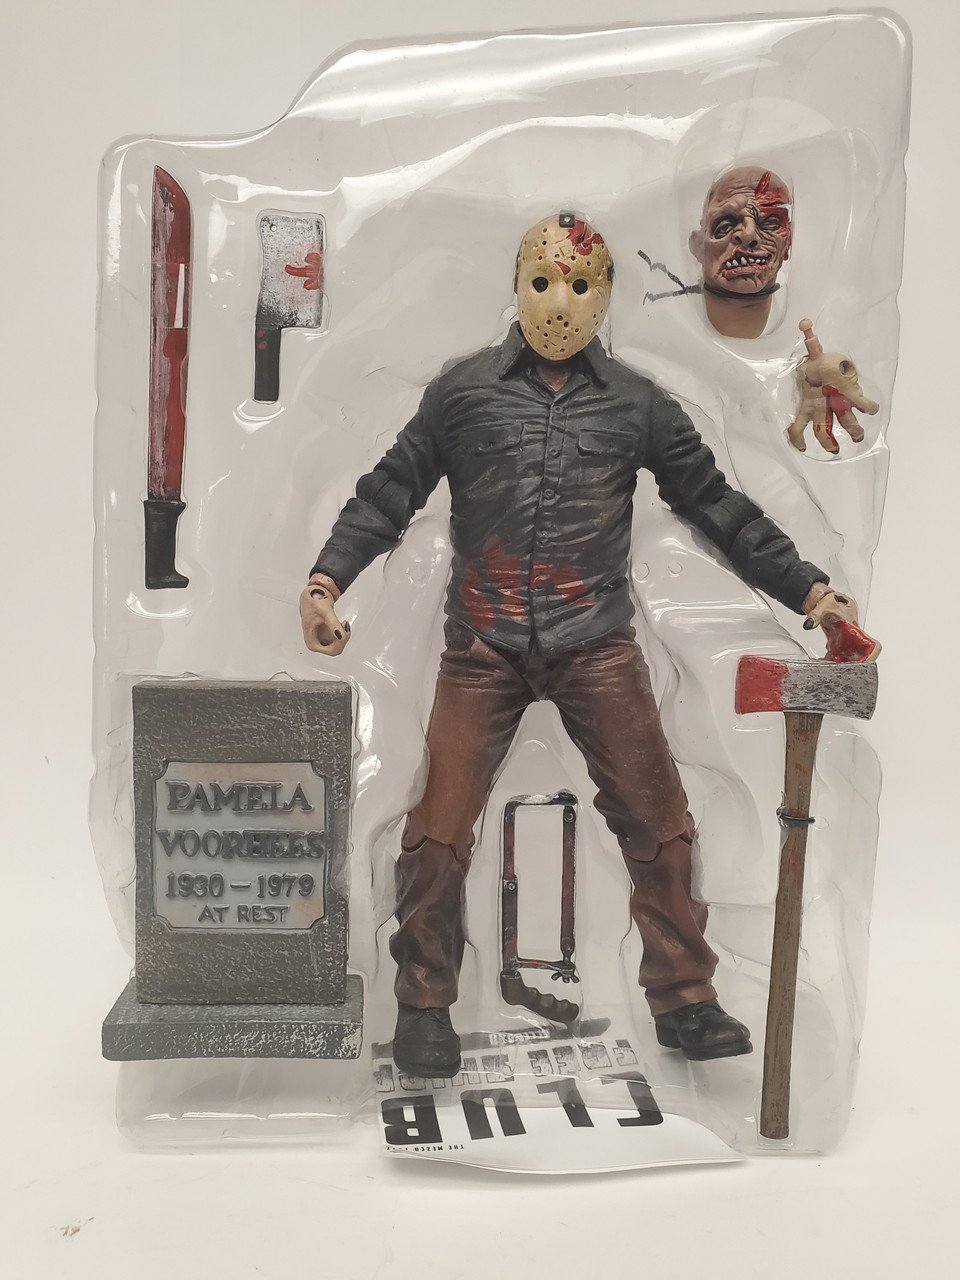 Friday the 13th: Jason X Action Figure from McFarlane Toys…